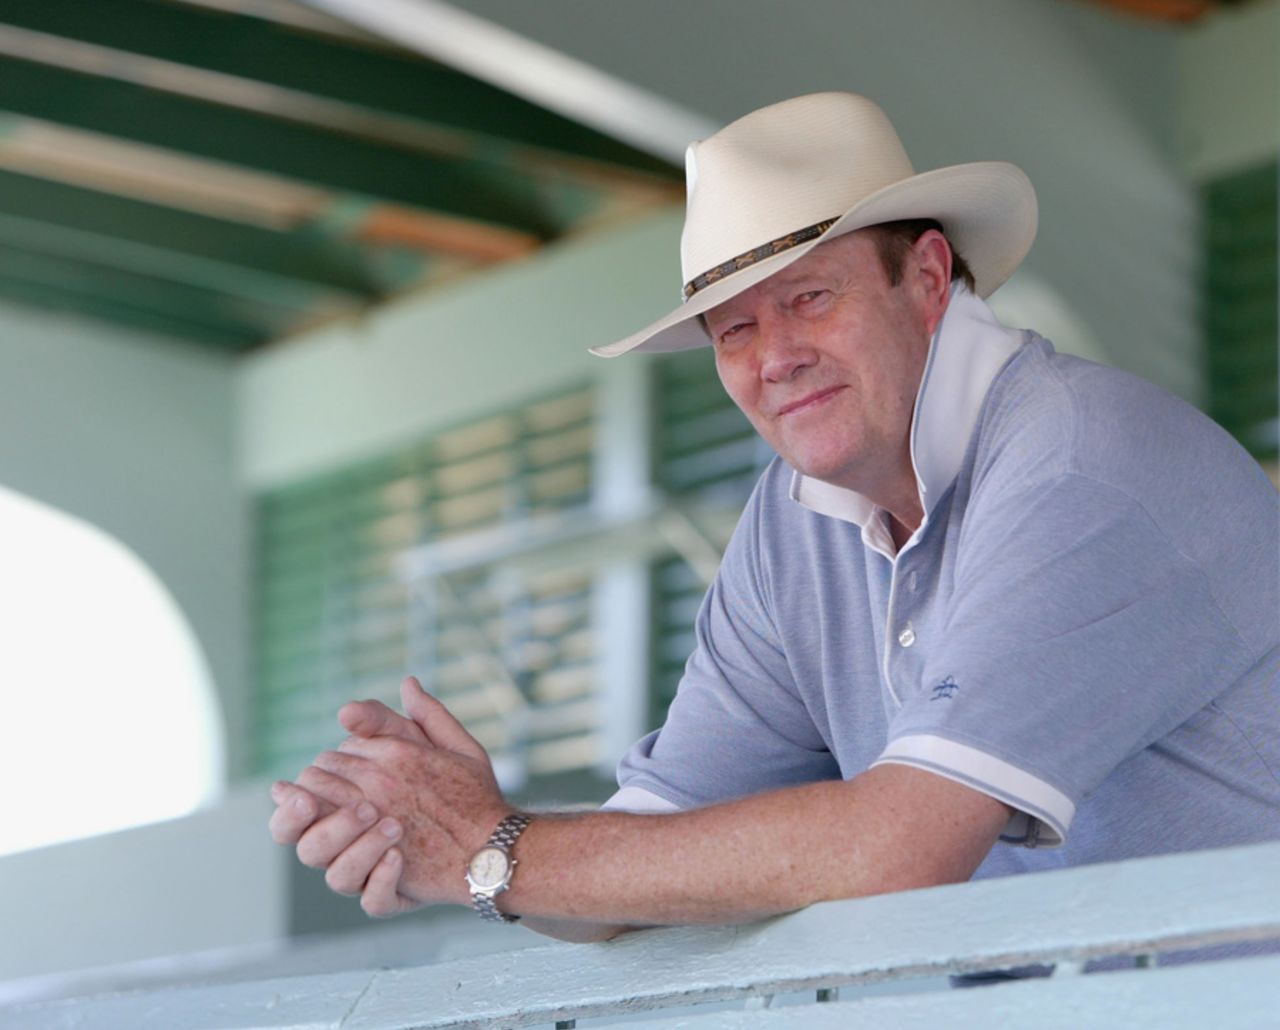 Tony Greig relaxes ahead of the Sabina Park Test, March 10, 2004